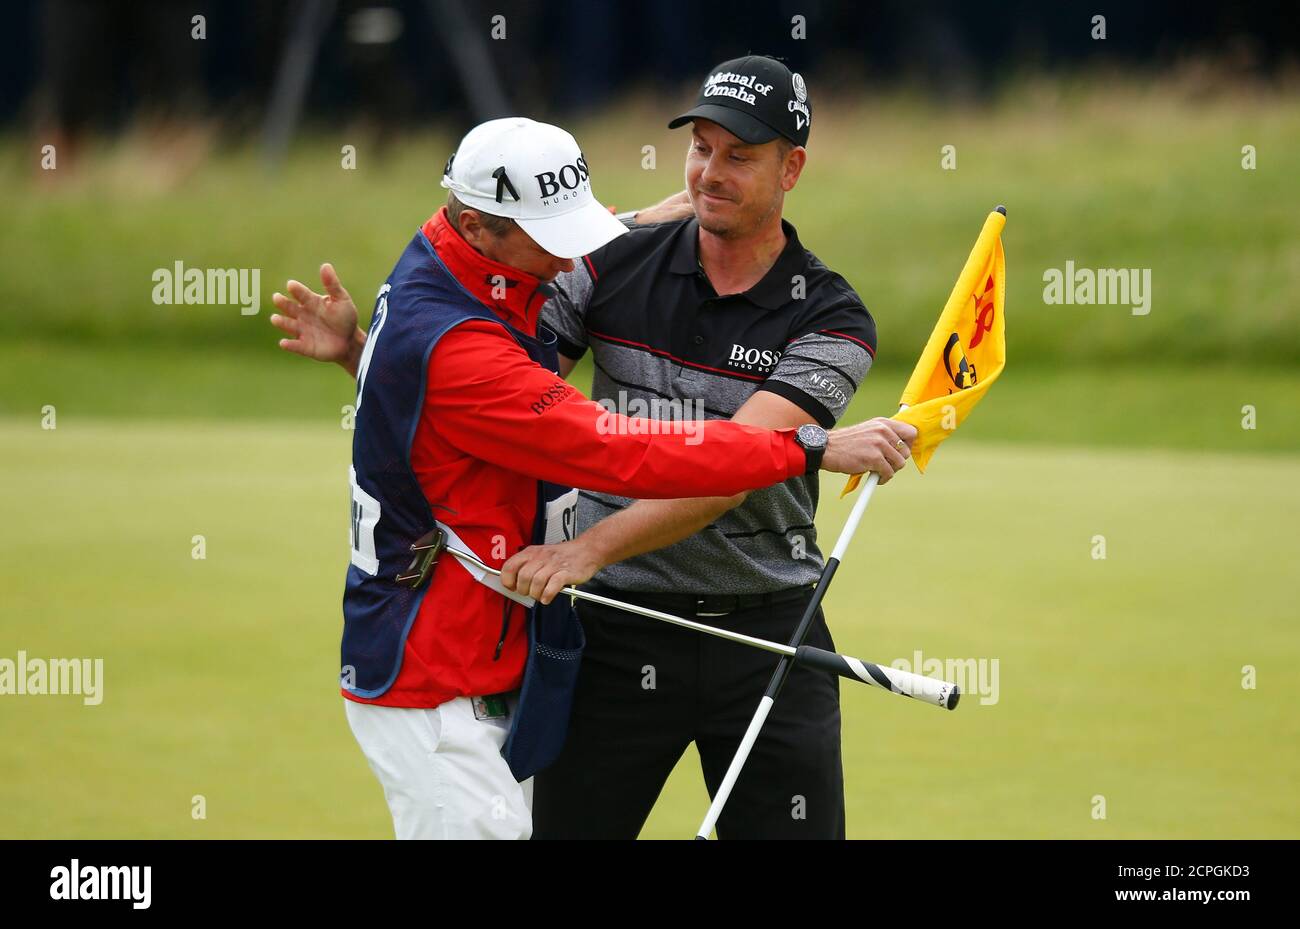 Sweden's Henrik Stenson celebrates with his caddie Gareth Lord after holing  a birdie putt on the 18th green to win the British Open golf championship  at Royal Troon, Scotland, Britain - 17/07/2016.